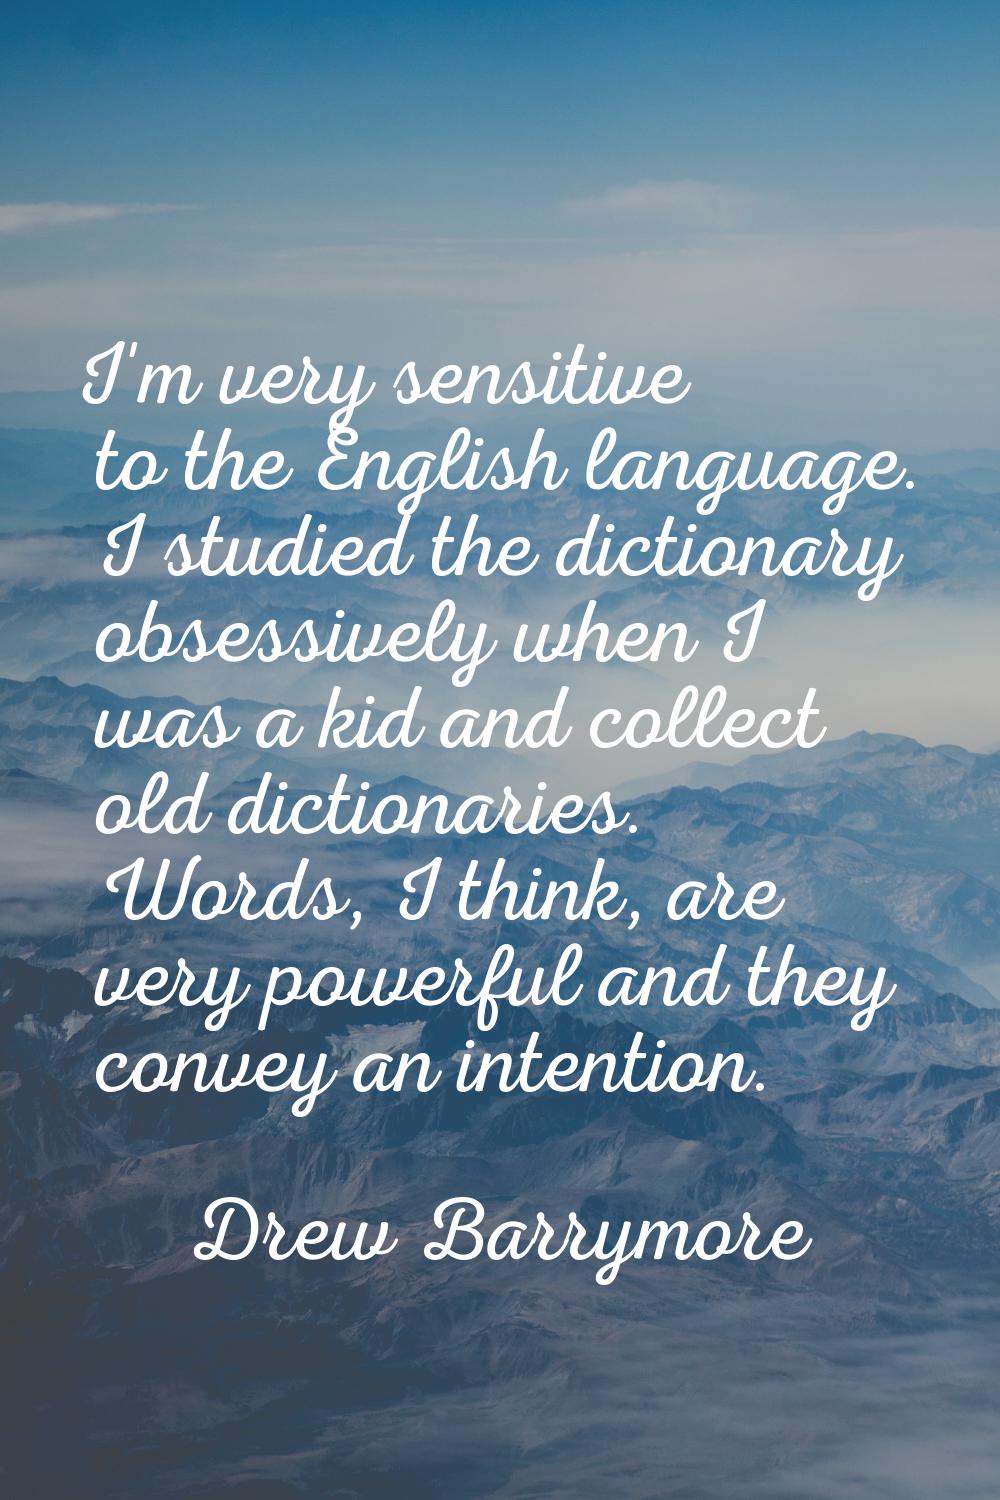 I'm very sensitive to the English language. I studied the dictionary obsessively when I was a kid a